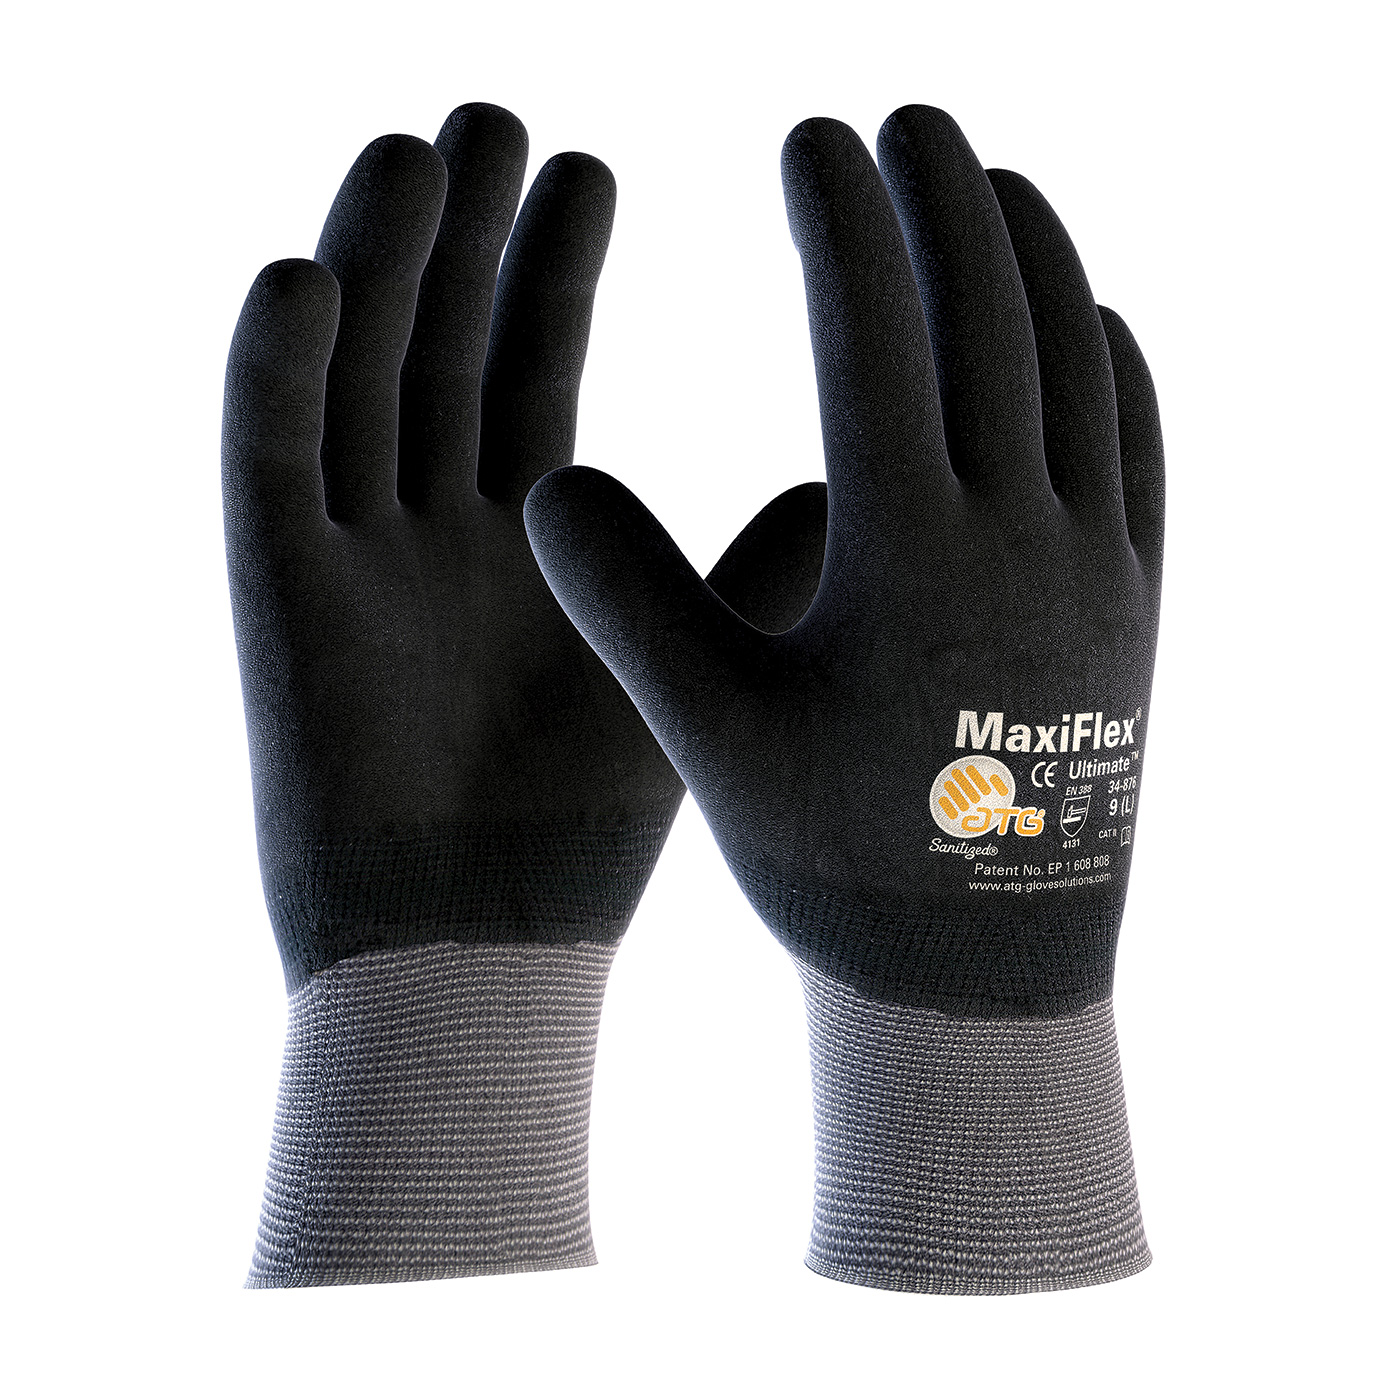 PIP 34-876/XL MaxiFlex Ultimate Seamless Knit Nylon/Lycra Glove with Nitrile Coated MicroFoam Grip on Full Hand - X-Large PID-34 876 XL